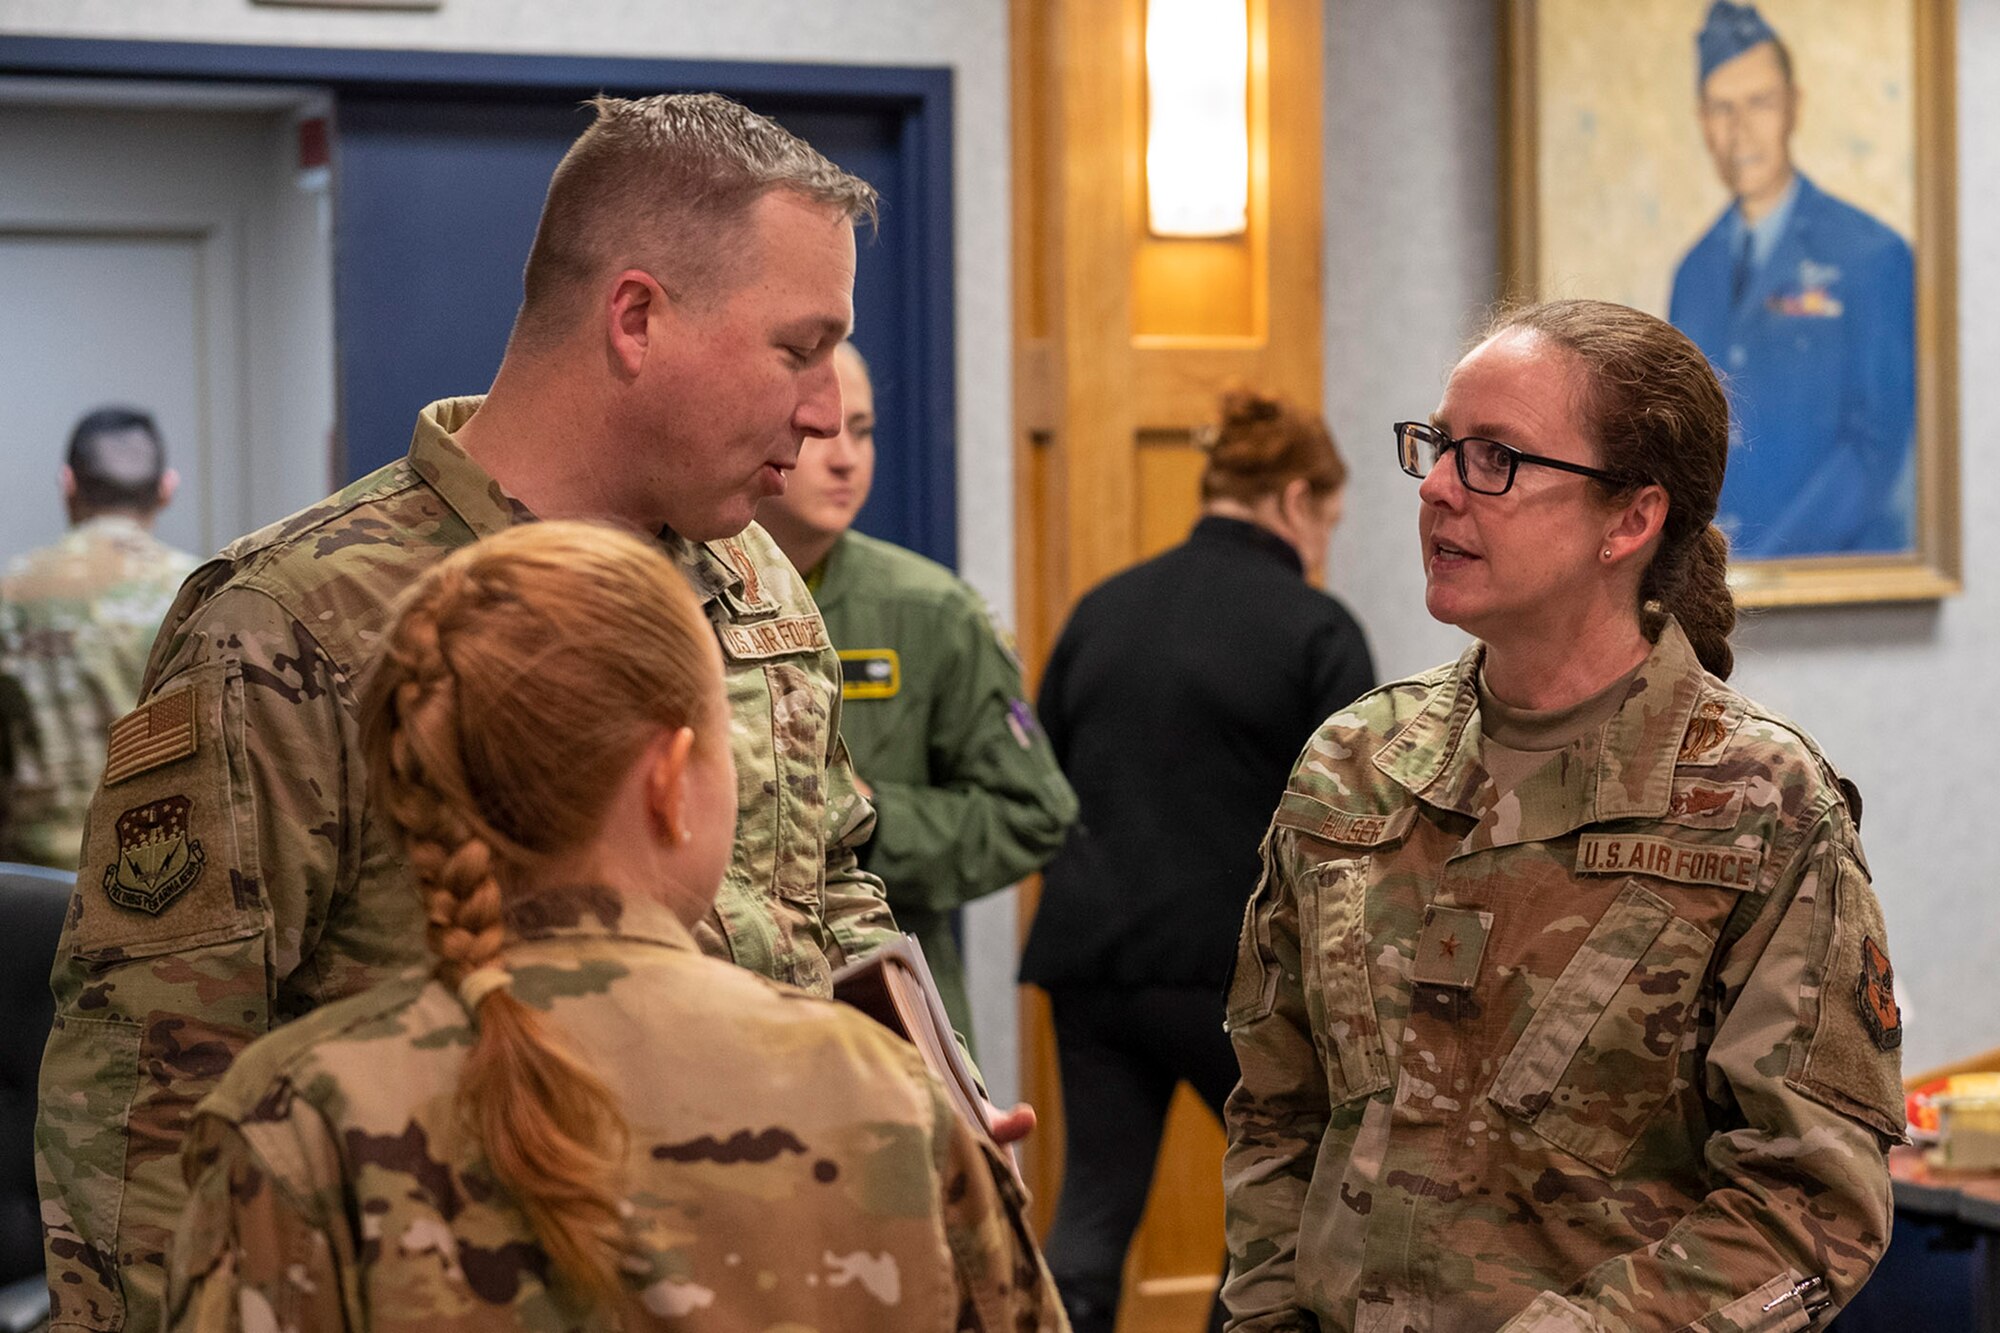 Brig. Gen. Stacy Jo Huser, principal assistant deputy administrator for military application, speaks with Col. Anita Feugate Opperman, 341st Missile Wing commander and Col. Daniel Voorhies, 341st MW vice commander March 9, 2022, during her visit to Malmstrom Air Force Base, Mont.